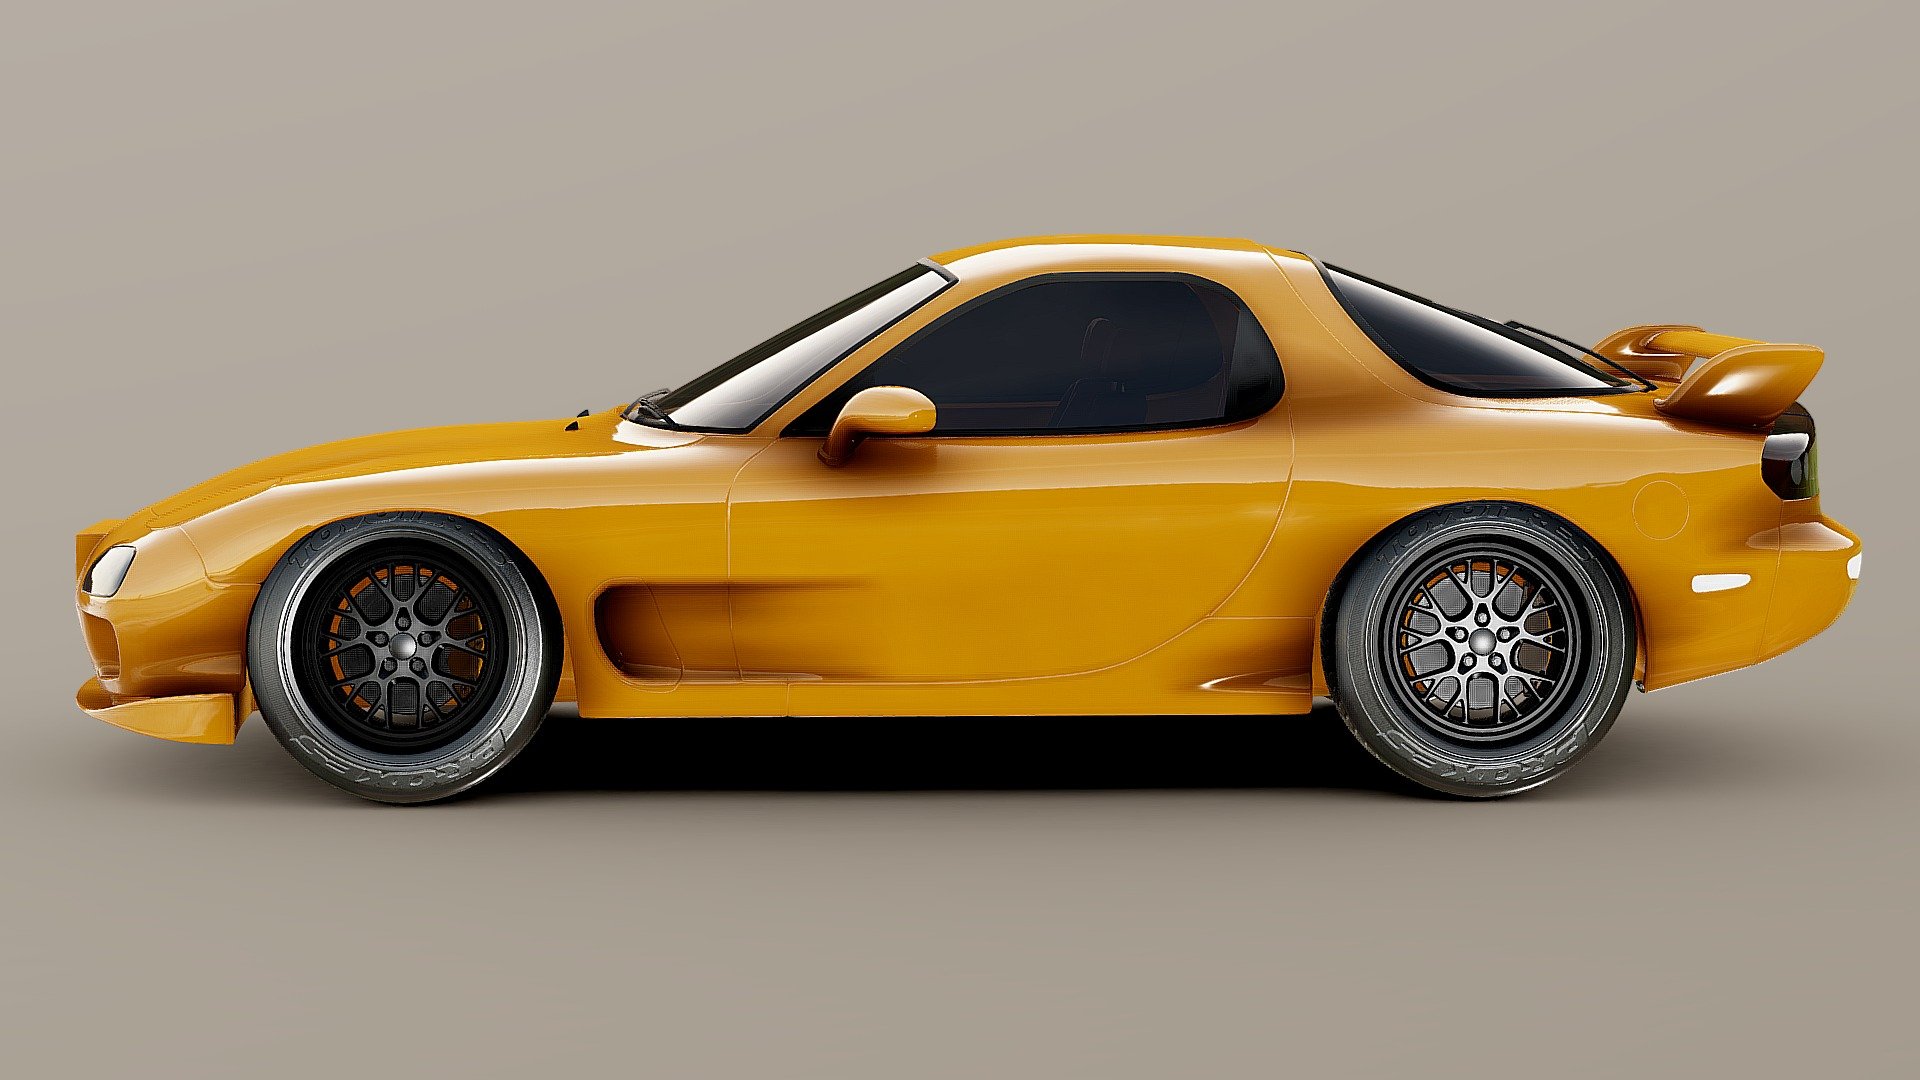 The Mazda RX-7 is a front-engine, rear-wheel-drive, rotary engine-powered sports car that was manufactured and marketed by Mazda from 1978 until 2002 across three generations, all of which made use of a compact, lightweight Wankel rotary engine.

The first-generation RX-7, sometimes referred to as the SA (early) and FB (late), is a two-seater 2-door hatchback coupé. It featured a 12A carbureted rotary engine as well as the option for a 13B rotary engine with electronic fuel injection in later years.

The second-generation RX-7, sometimes referred to as the FC, was offered as a 2-seater coupé with a 2+2 option available in some markets, as well as in a convertible body style. This was powered by the 13B rotary engine, offered in naturally aspirated or turbocharged forms.

The third-generation RX-7, sometimes referred to as the FD, was offered a 2+2-seater coupé with a limited run of a 2-seater option. Some markets were only available as a 2-seater. It featured a sequentially-turbocharged 13B REW engine 3d model